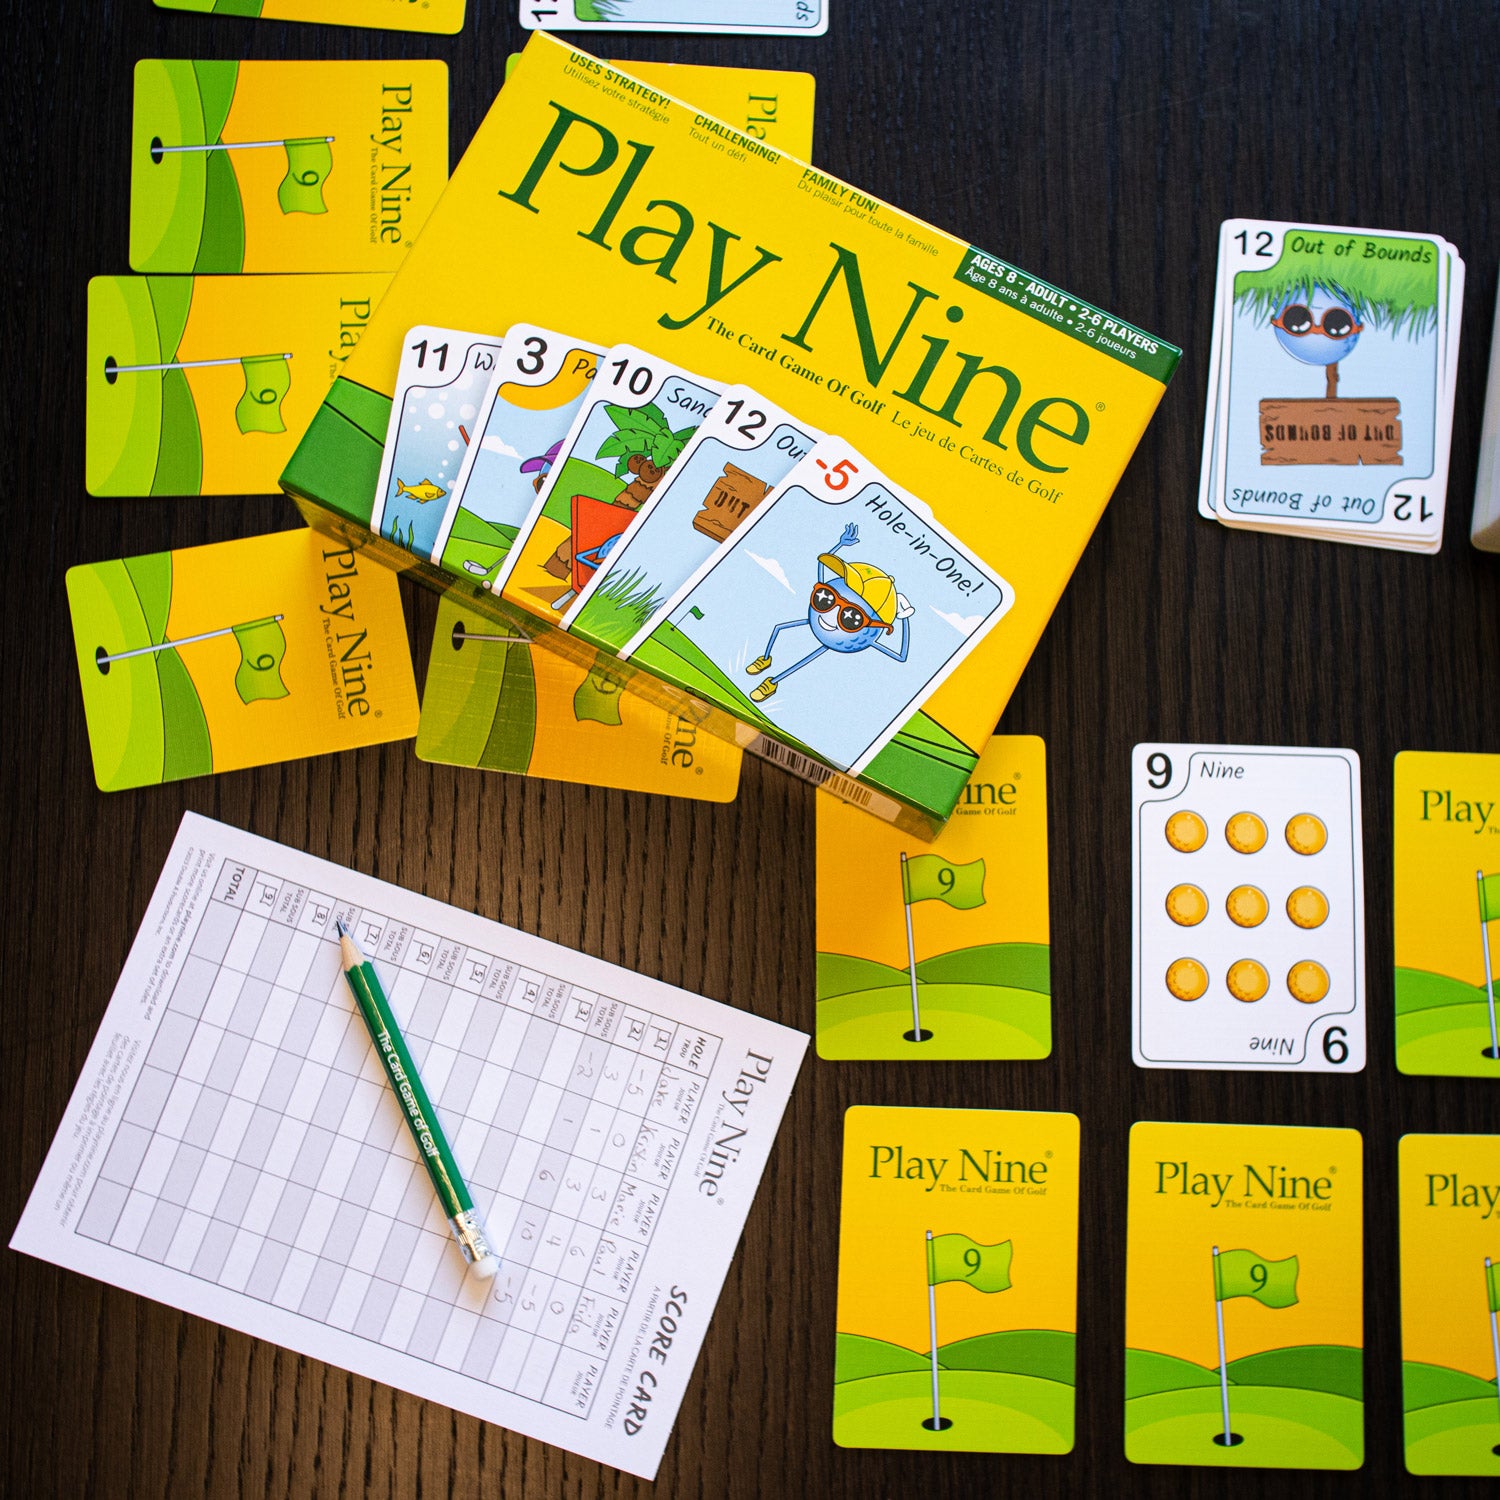 Play Nine: The Card Game of Golf